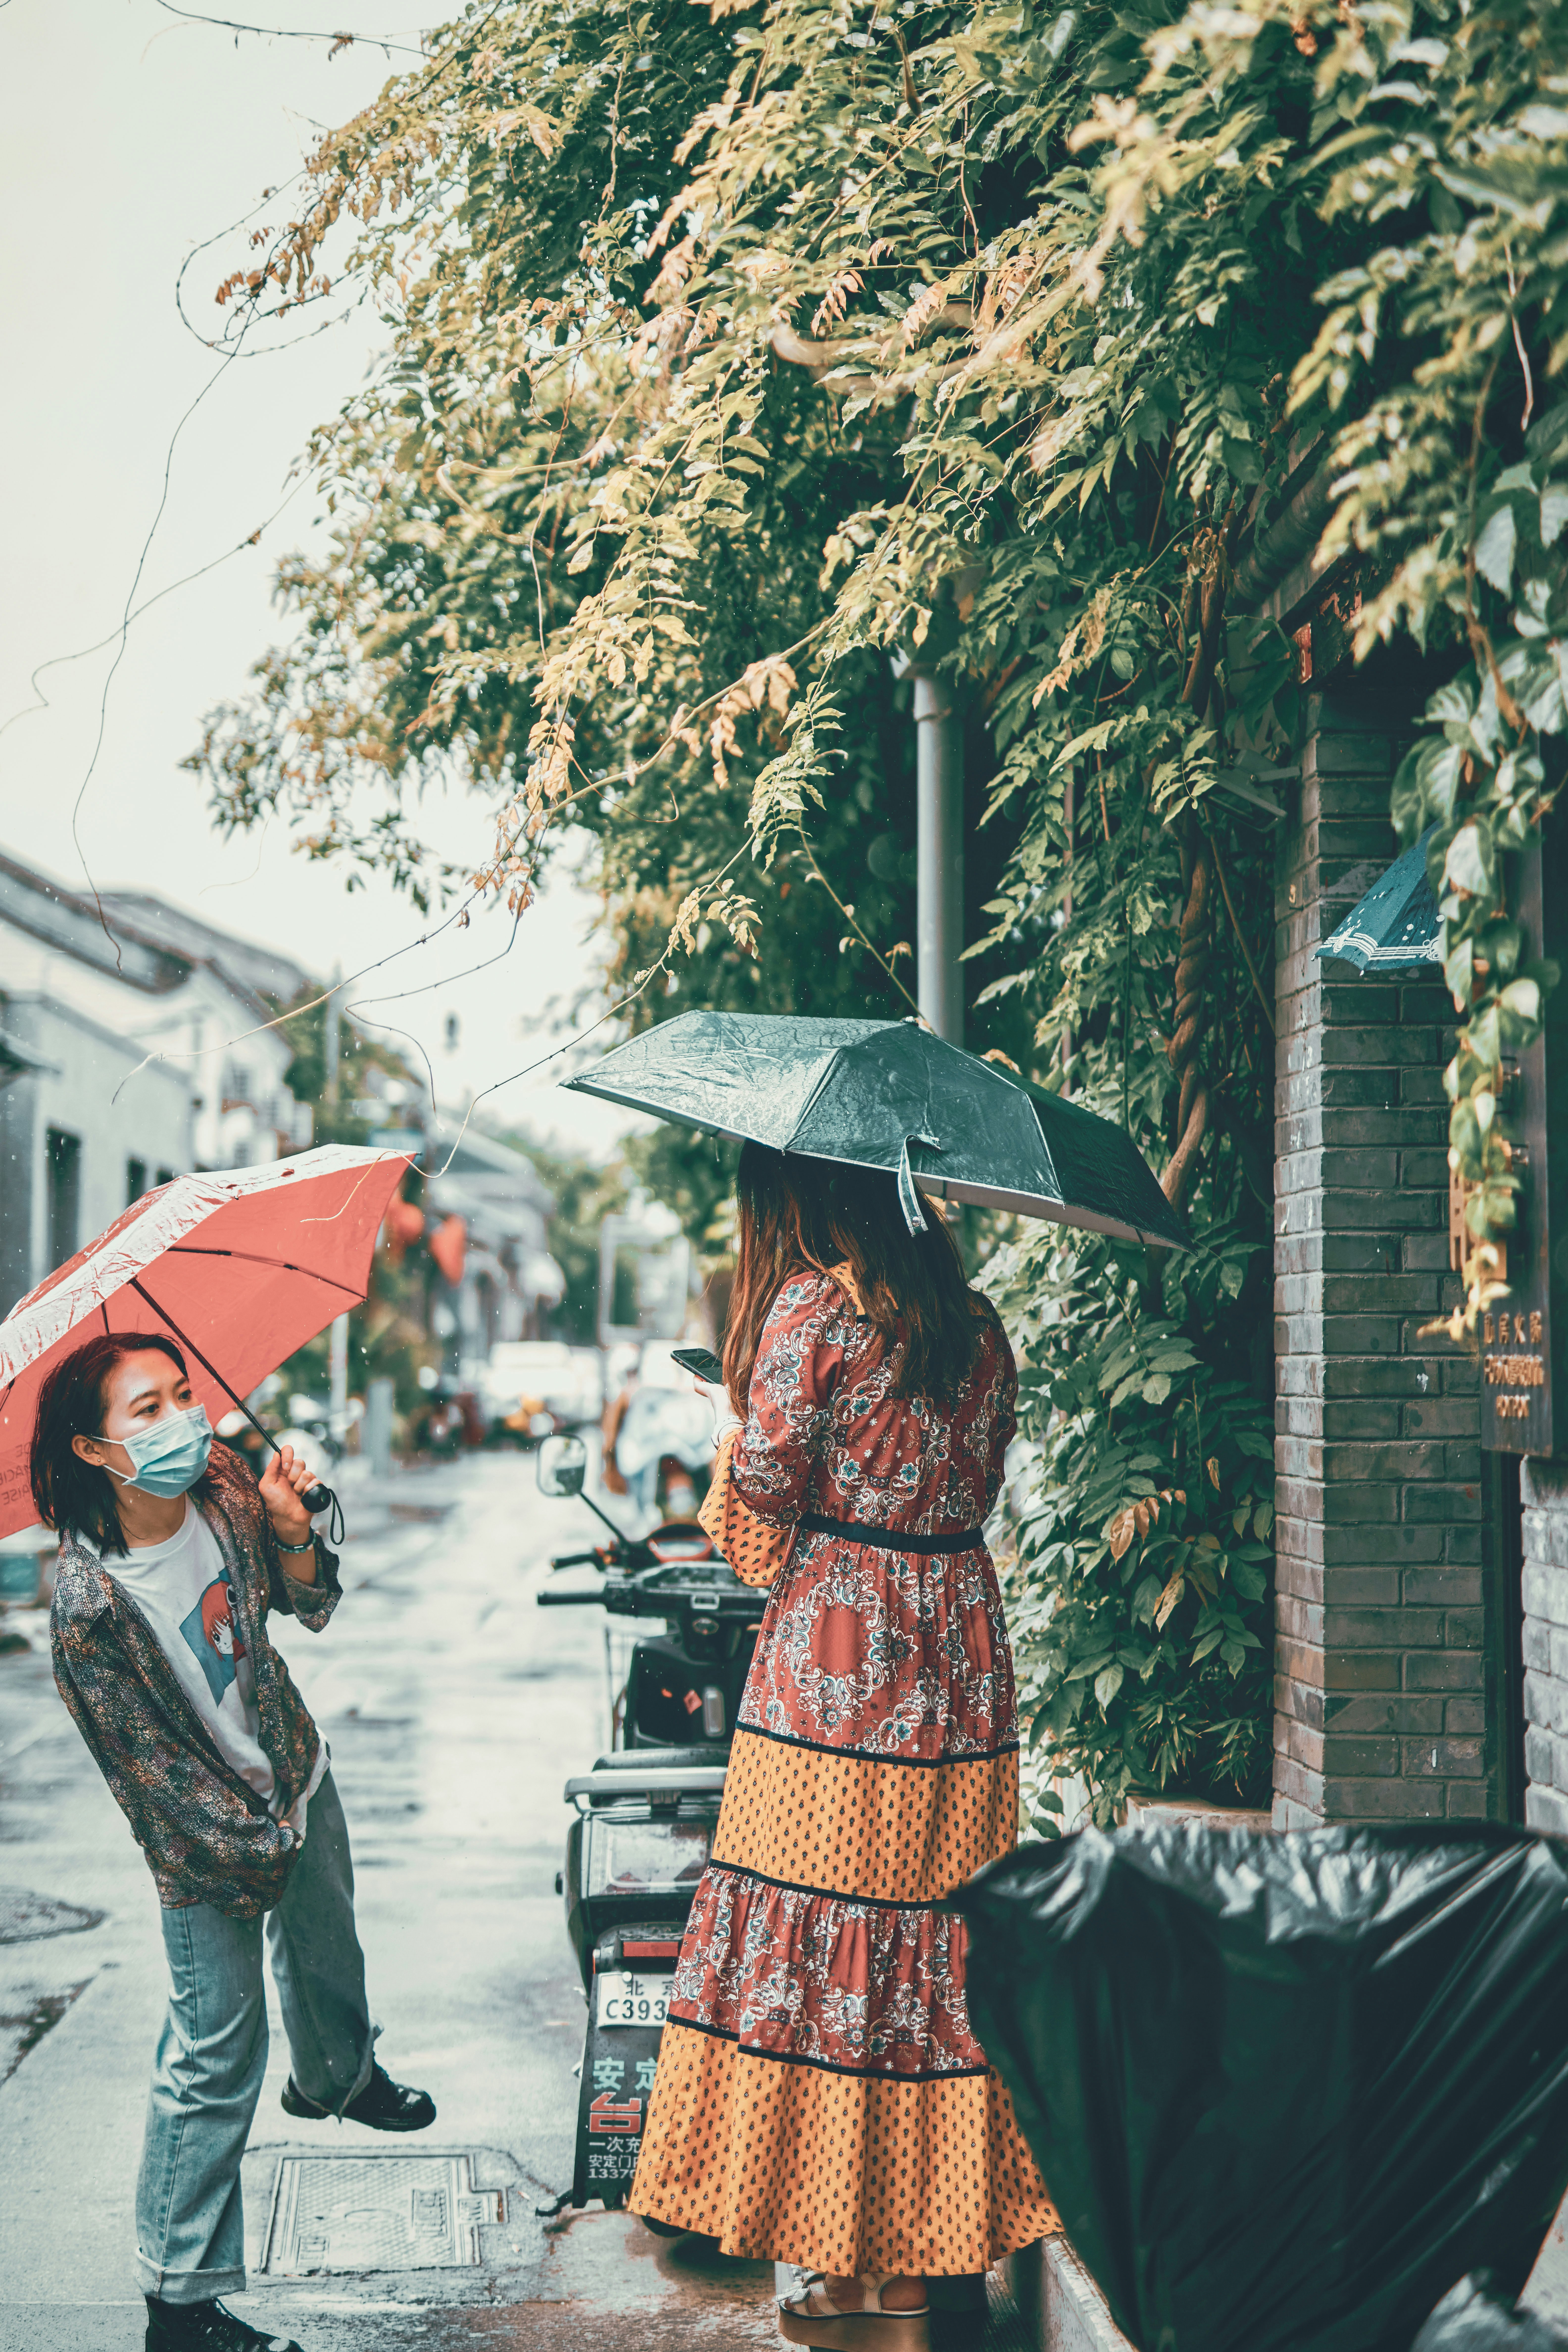 woman in red and brown dress holding umbrella walking on sidewalk during daytime